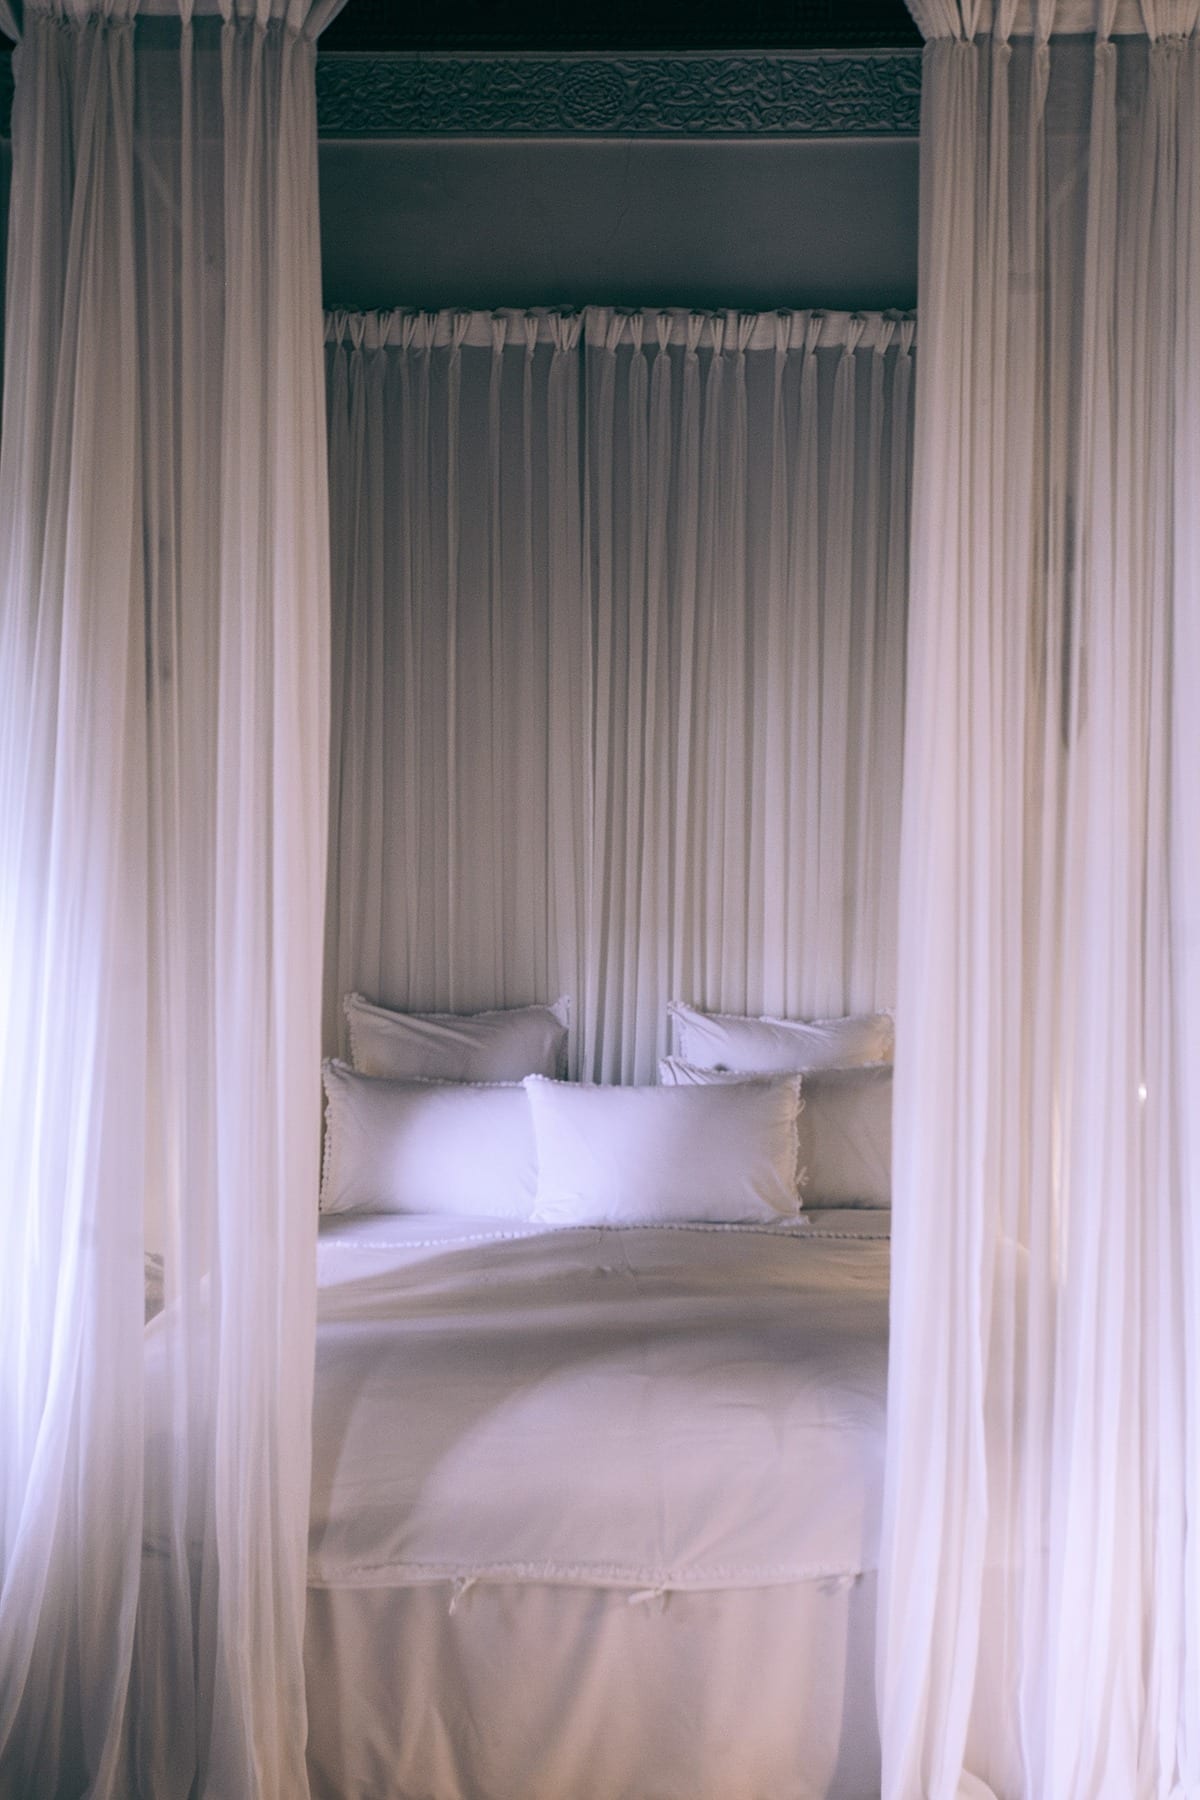 All-white bed with canopy